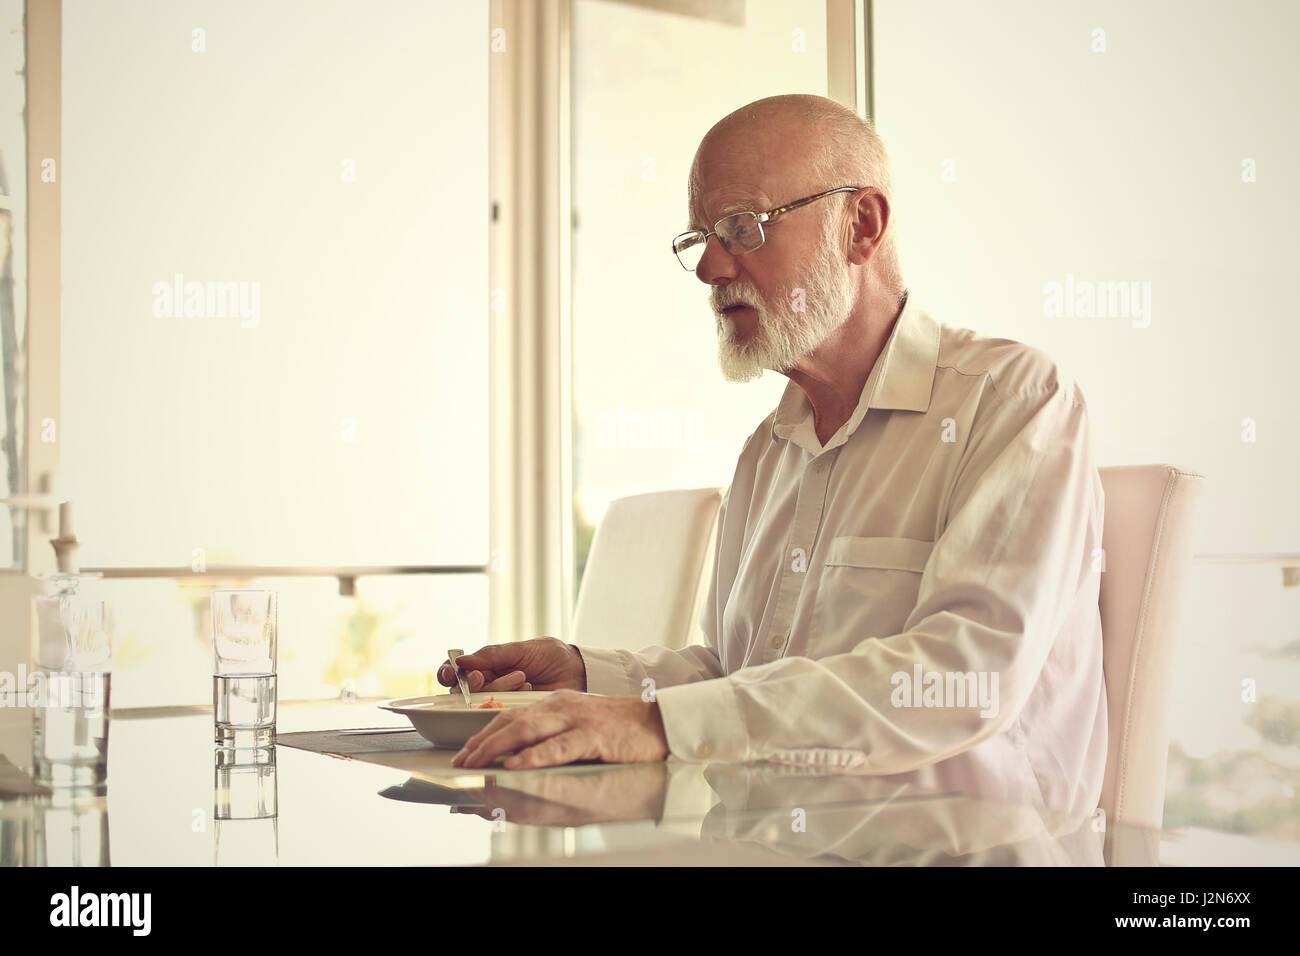 Old man eating in restaurant Stock Photo